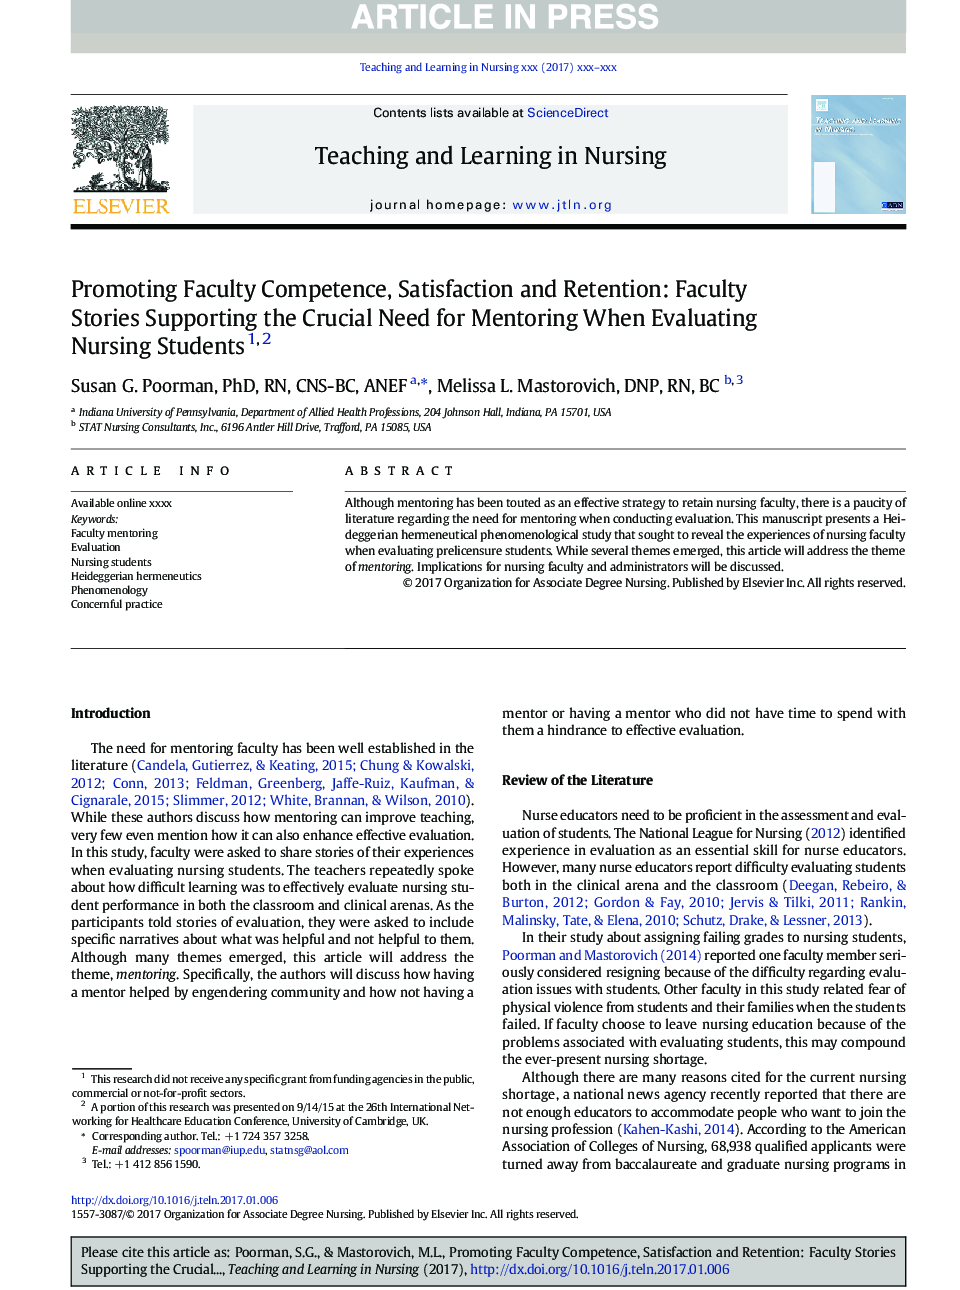 Promoting Faculty Competence, Satisfaction and Retention: Faculty Stories Supporting the Crucial Need for Mentoring When Evaluating Nursing Students